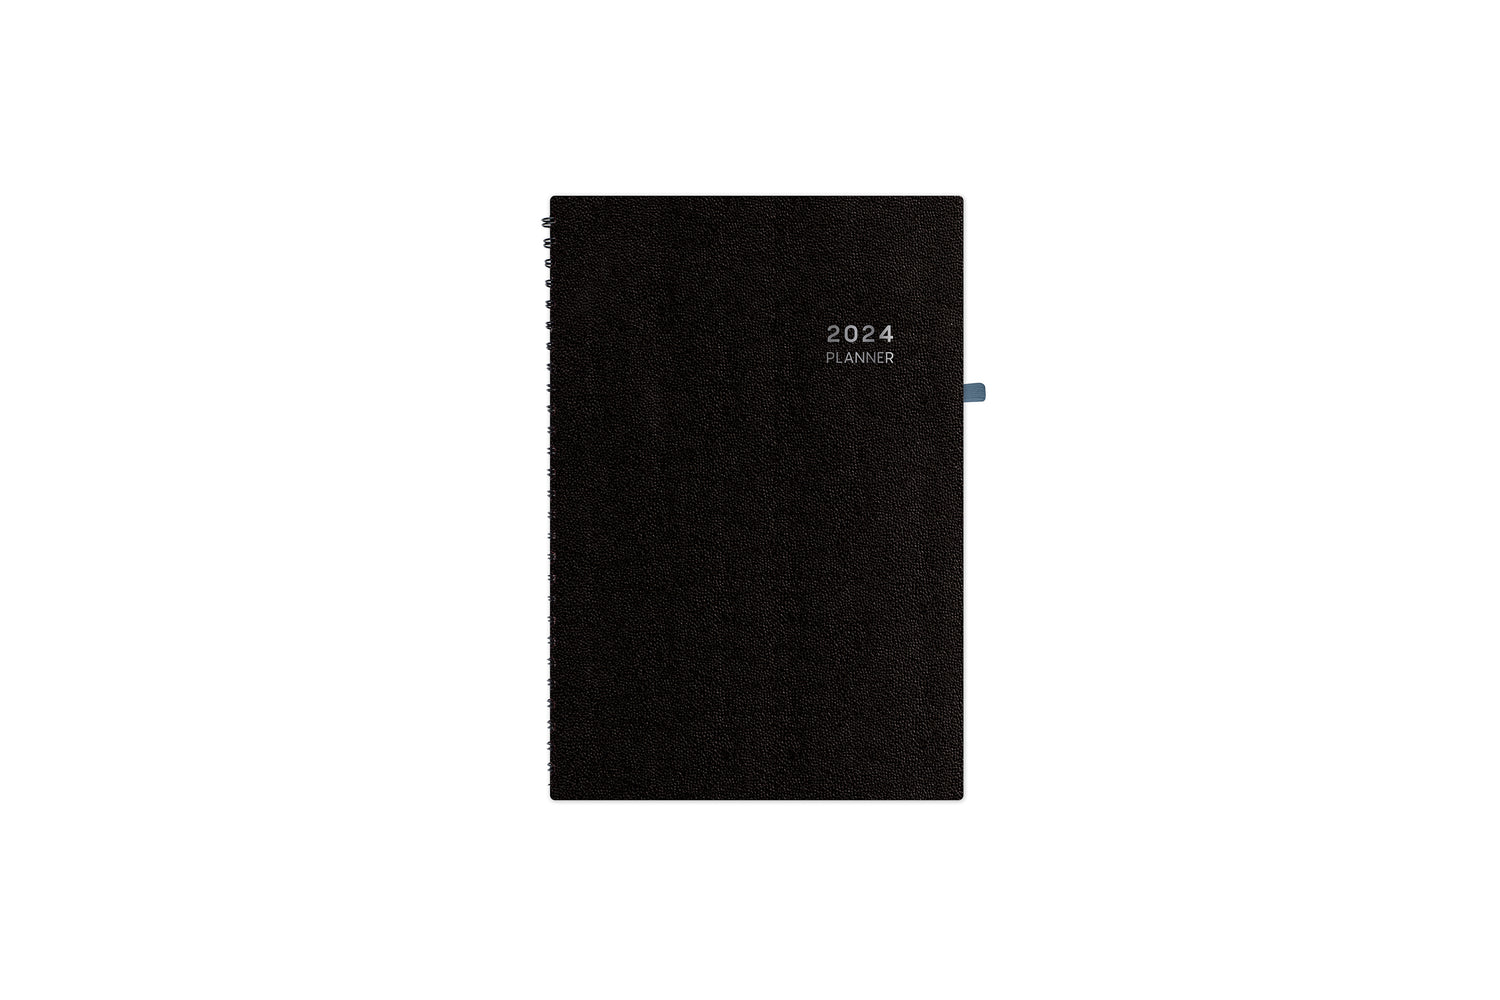 Classy and executive black pajco lexide cover for this 2024 weekly monthly planner notes in 5x8size from Blue Sky